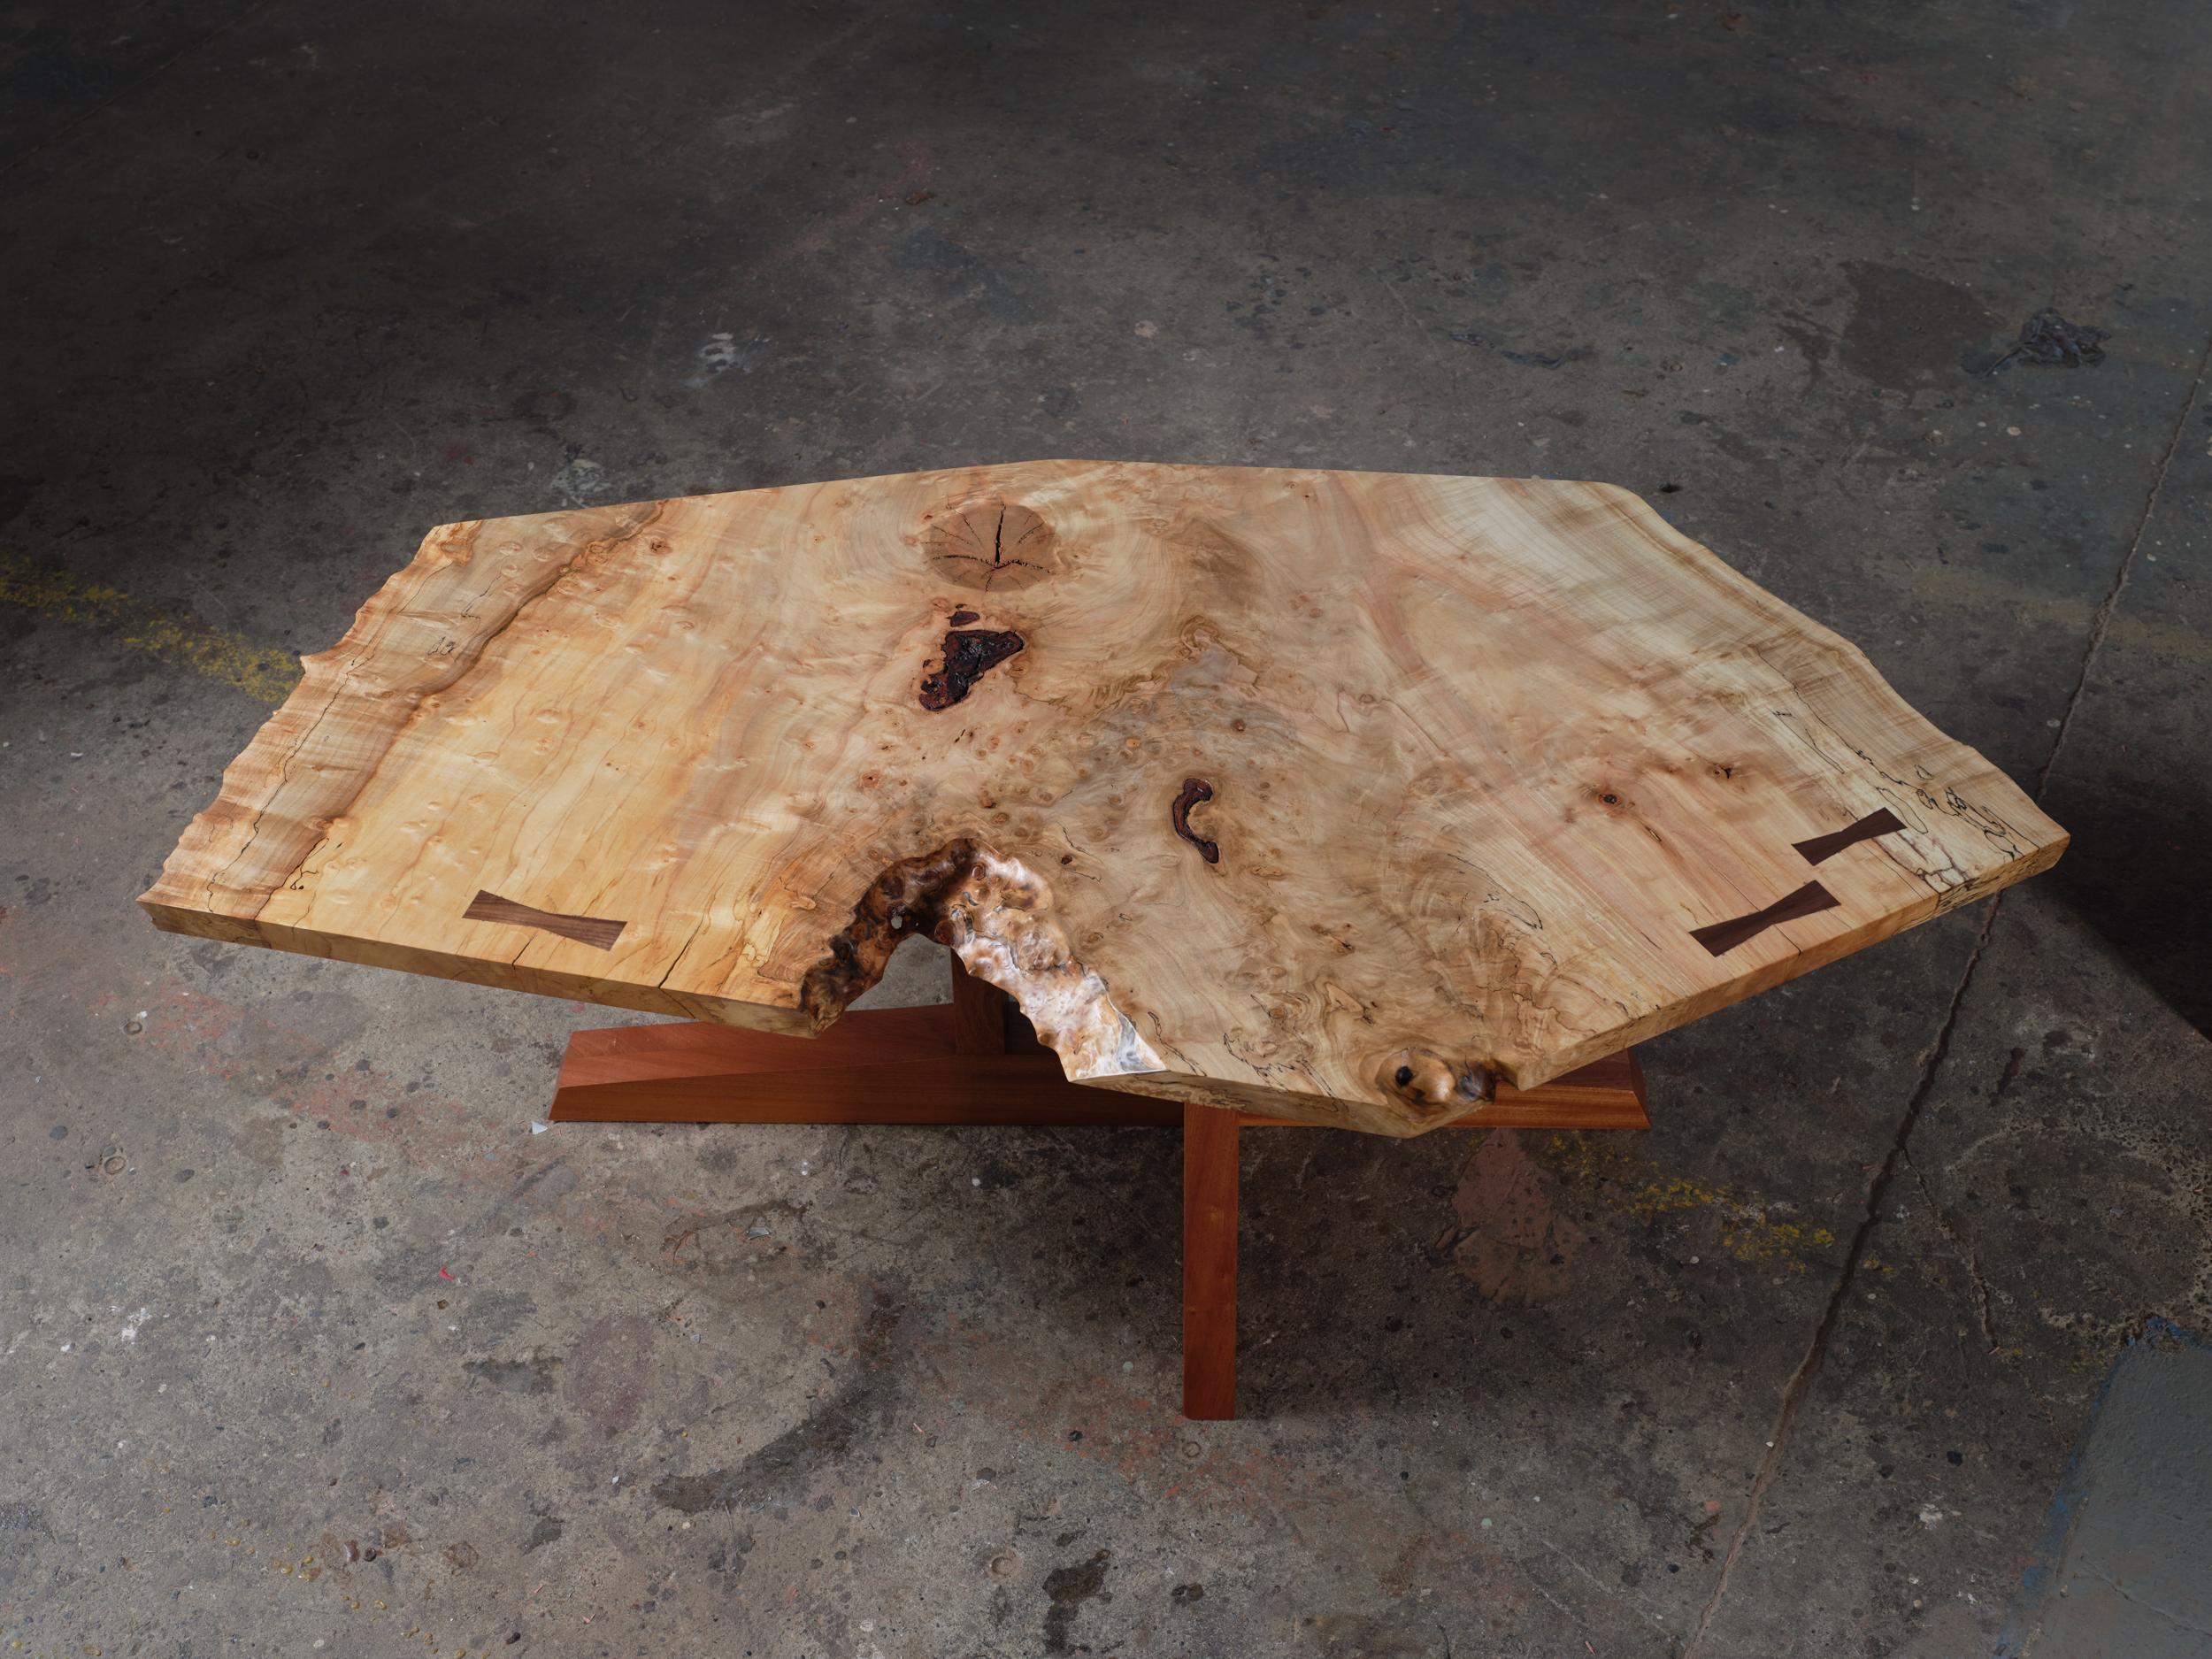 New Hope Coffee Table - Michael Oates In New Condition For Sale In Alpha, NJ